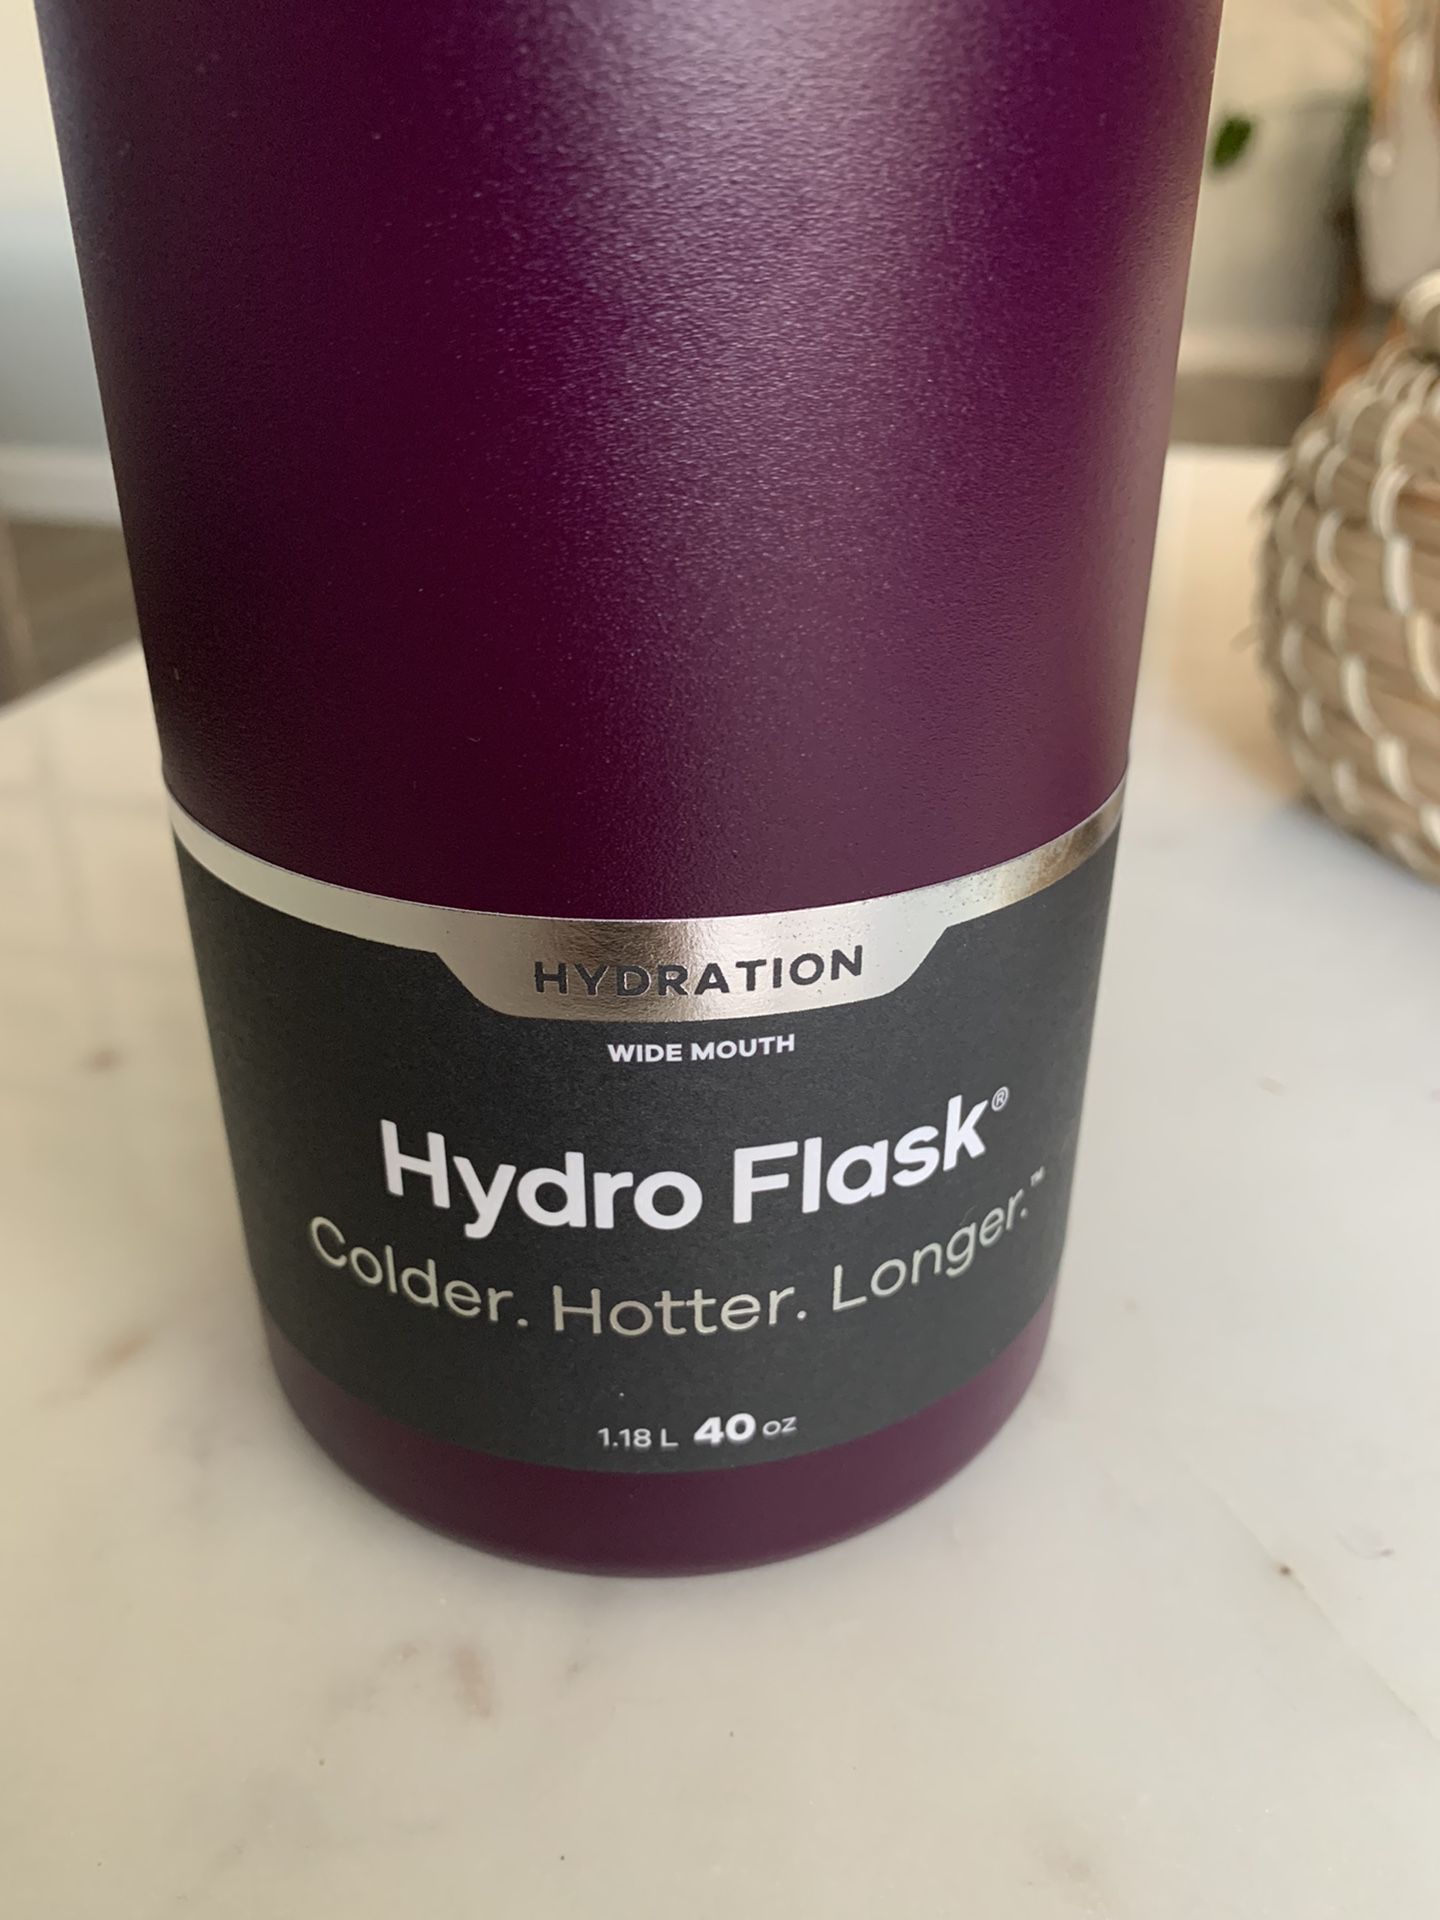 40 OZ HYDROFLASK IN SHADE MOCHA for Sale in Lincoln Acres, CA - OfferUp